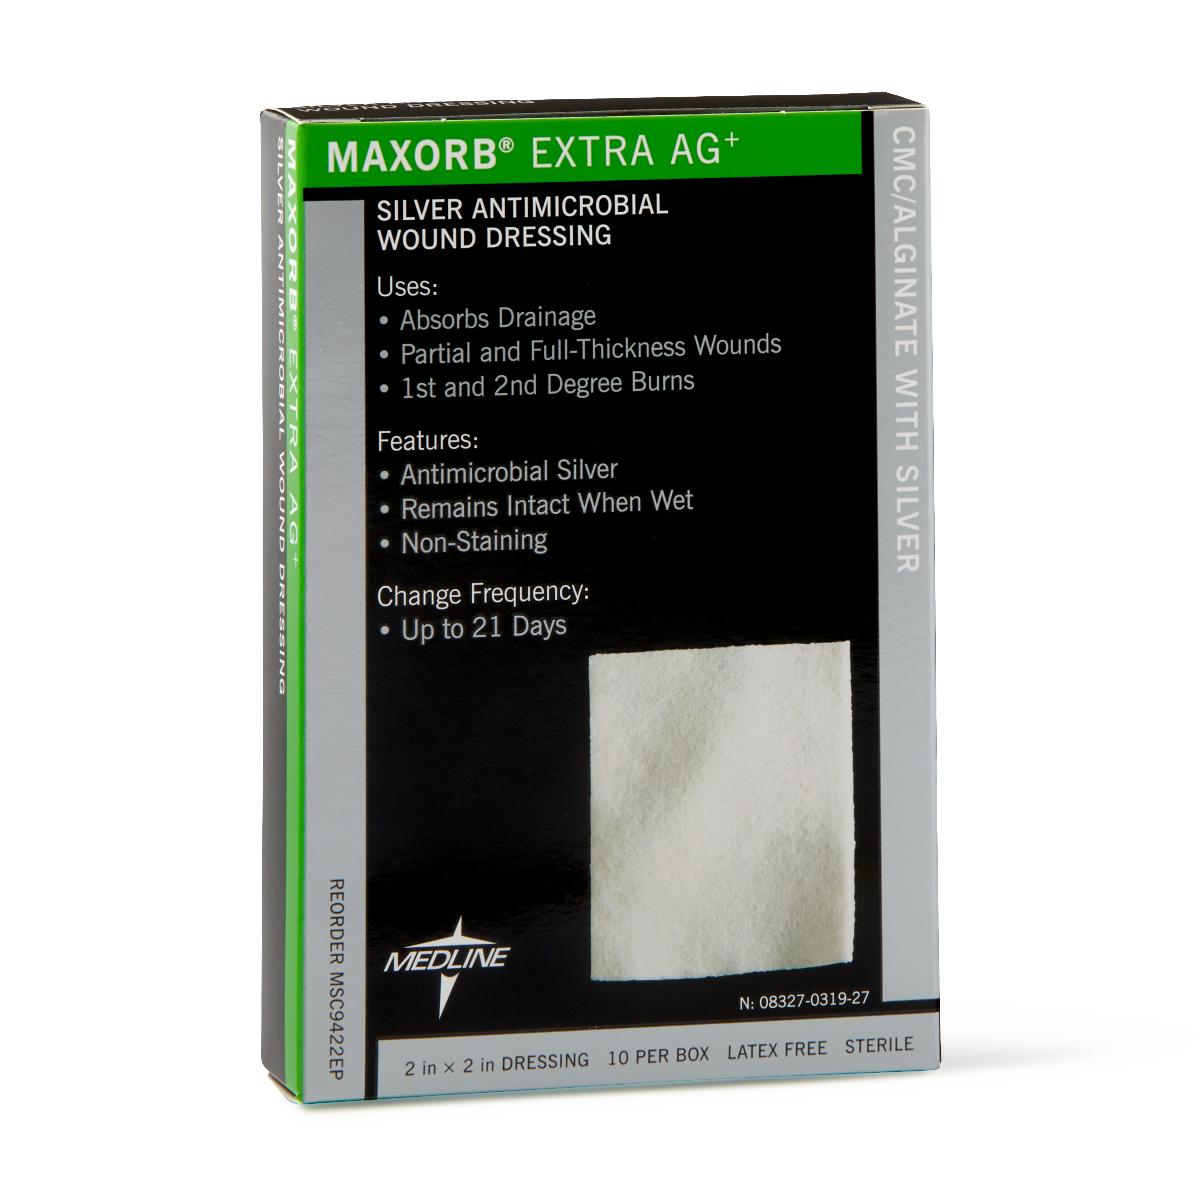 100 Each-Case / Max: 21 Days: Check Drainage / Silver Calcium Alginate Wound Care - MEDLINE - Wasatch Medical Supply